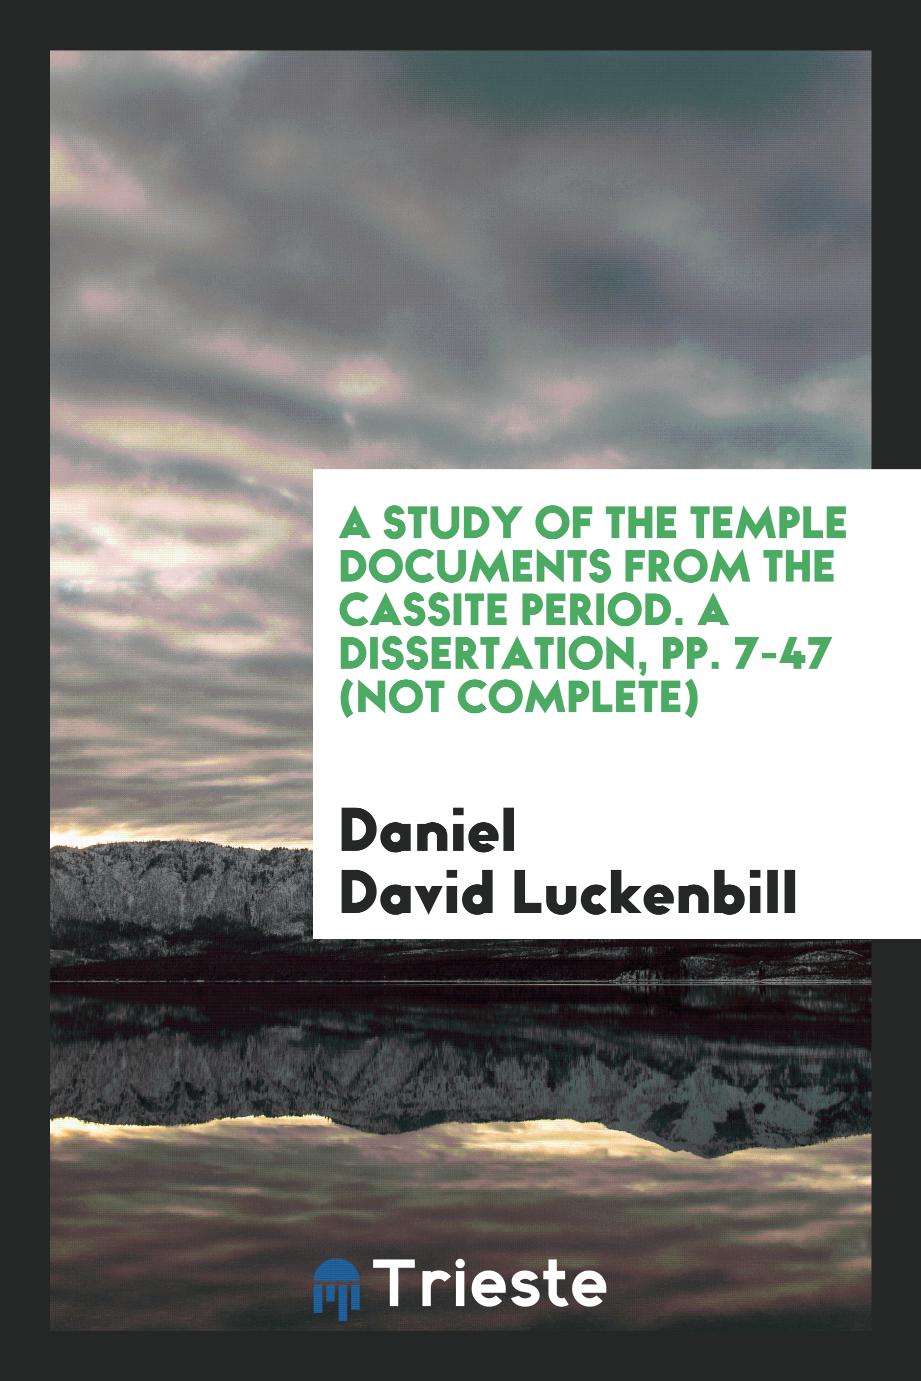 A Study of the Temple Documents from the Cassite Period. A dissertation, pp. 7-47 (not complete)